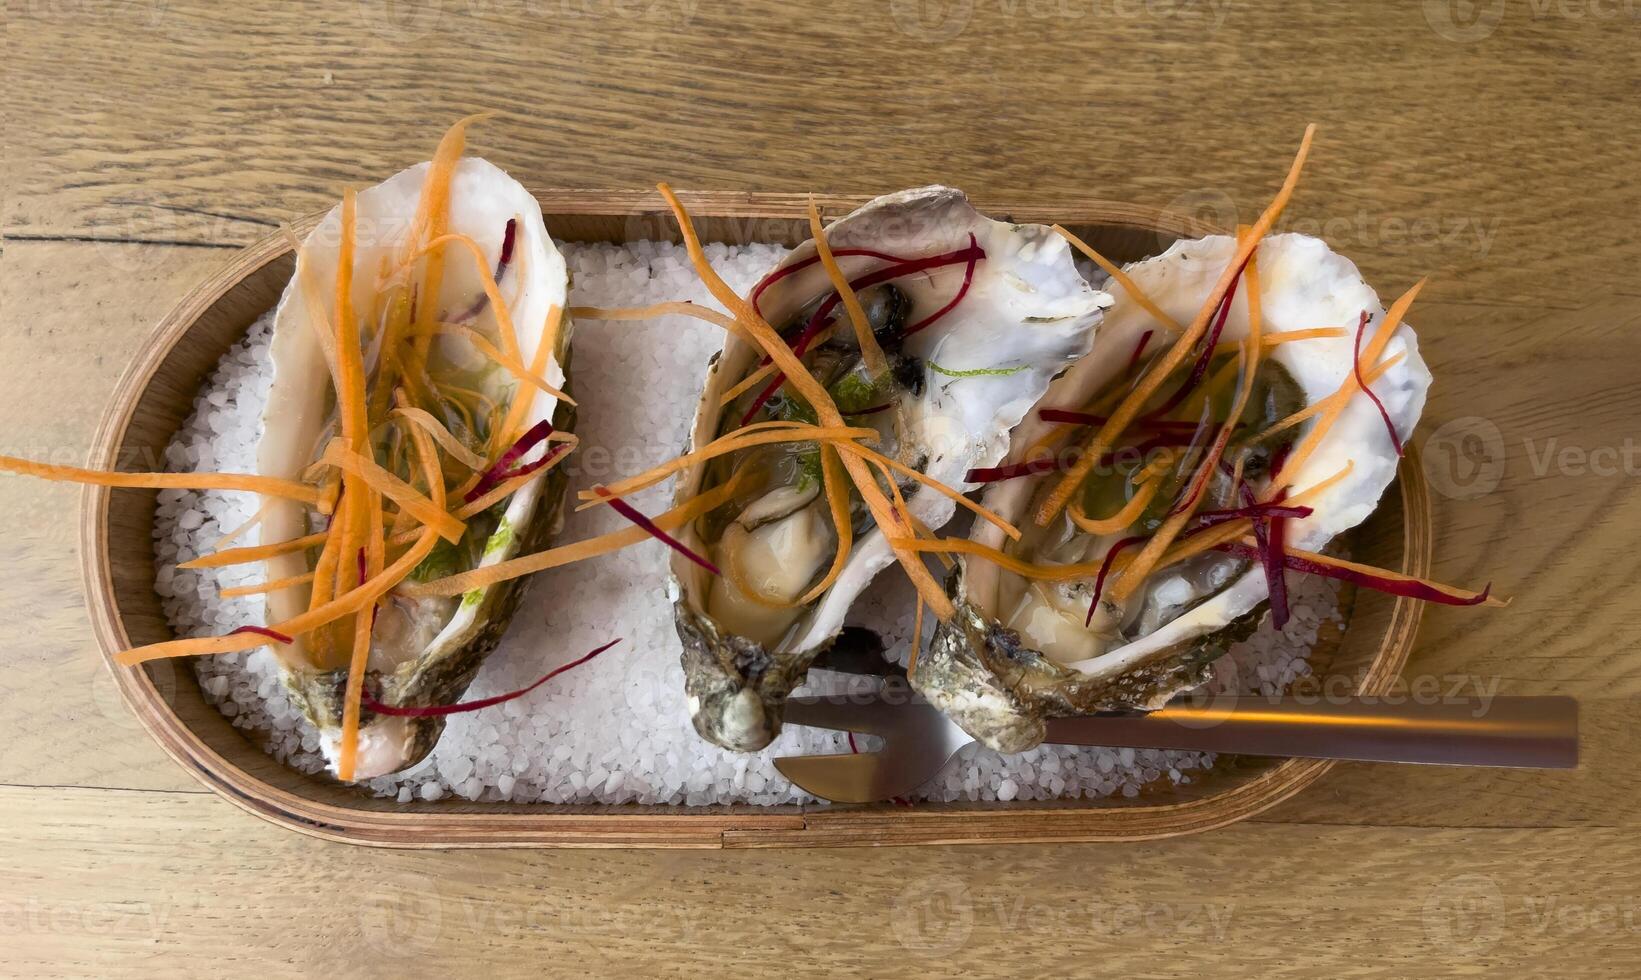 three oysters on a wooden tray with a knife and fork photo